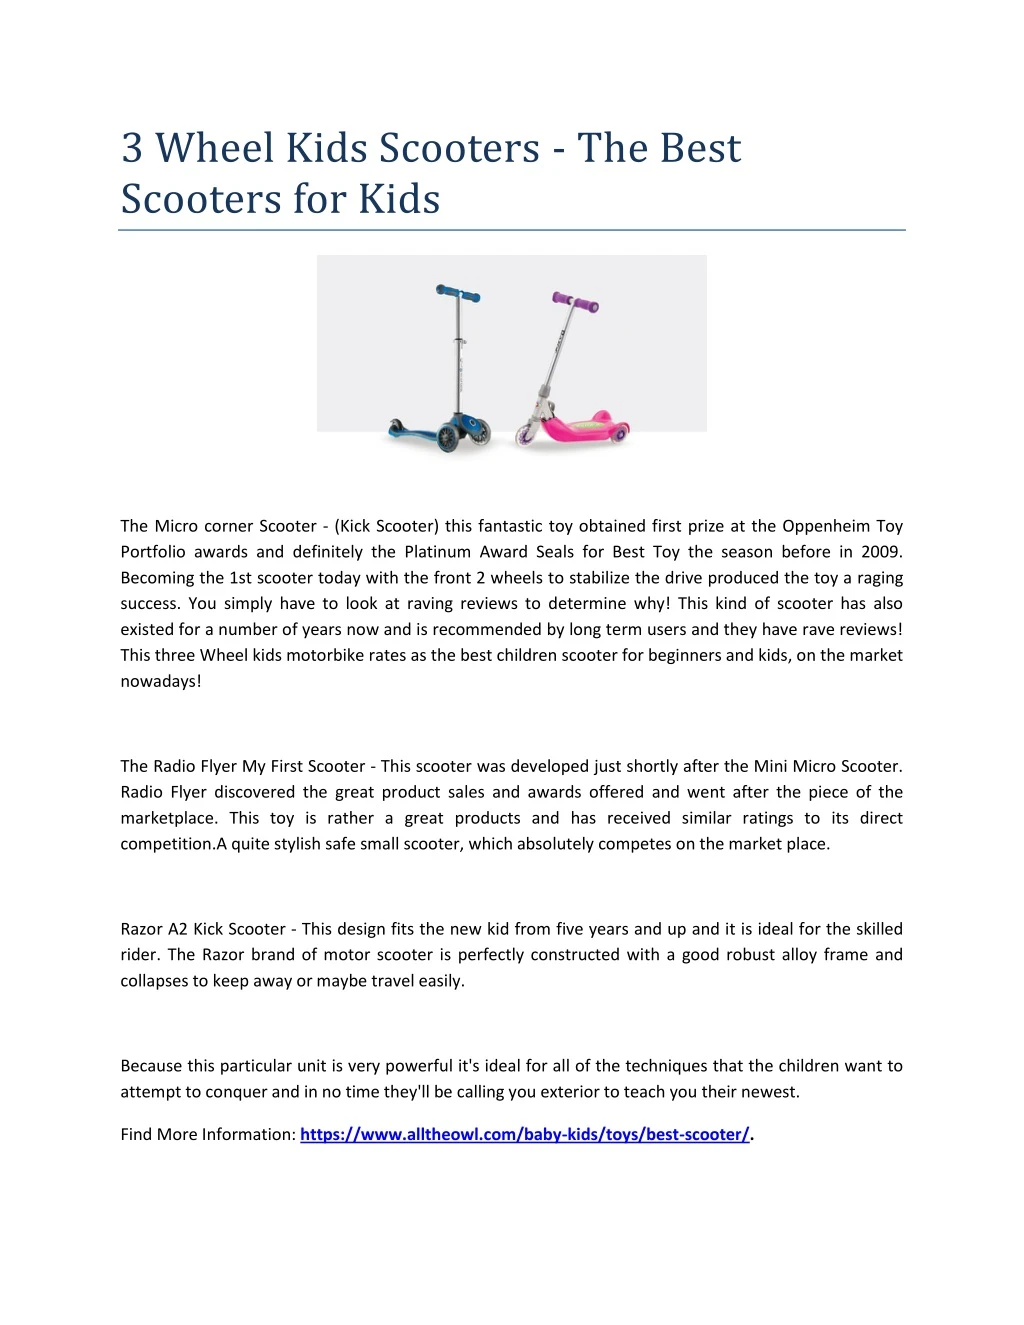 3 wheel kids scooters the best scooters for kids